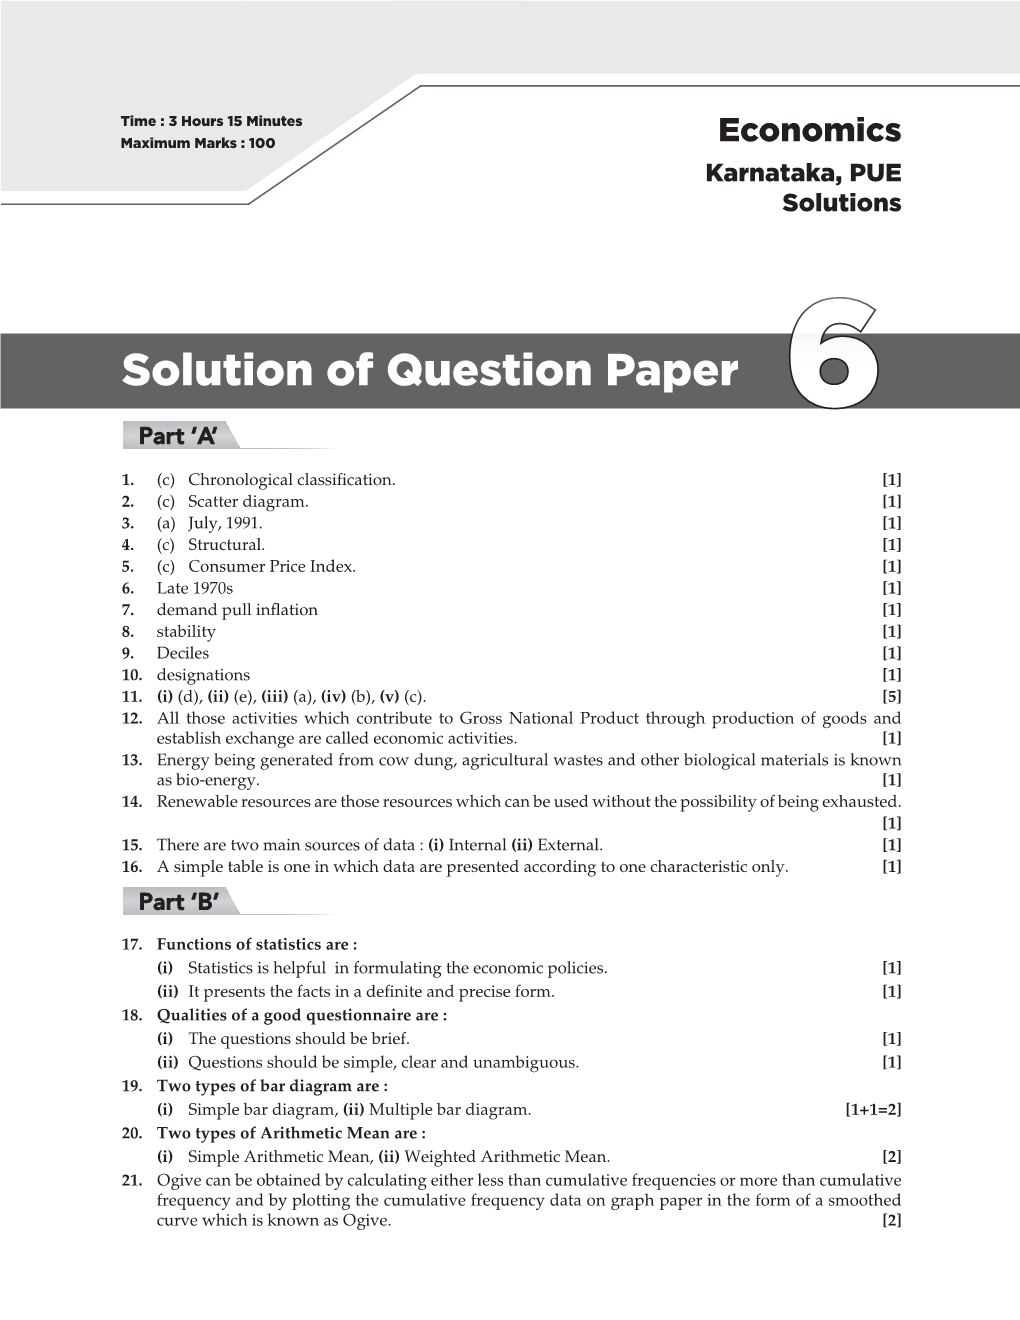 Solution of Question Paper 6